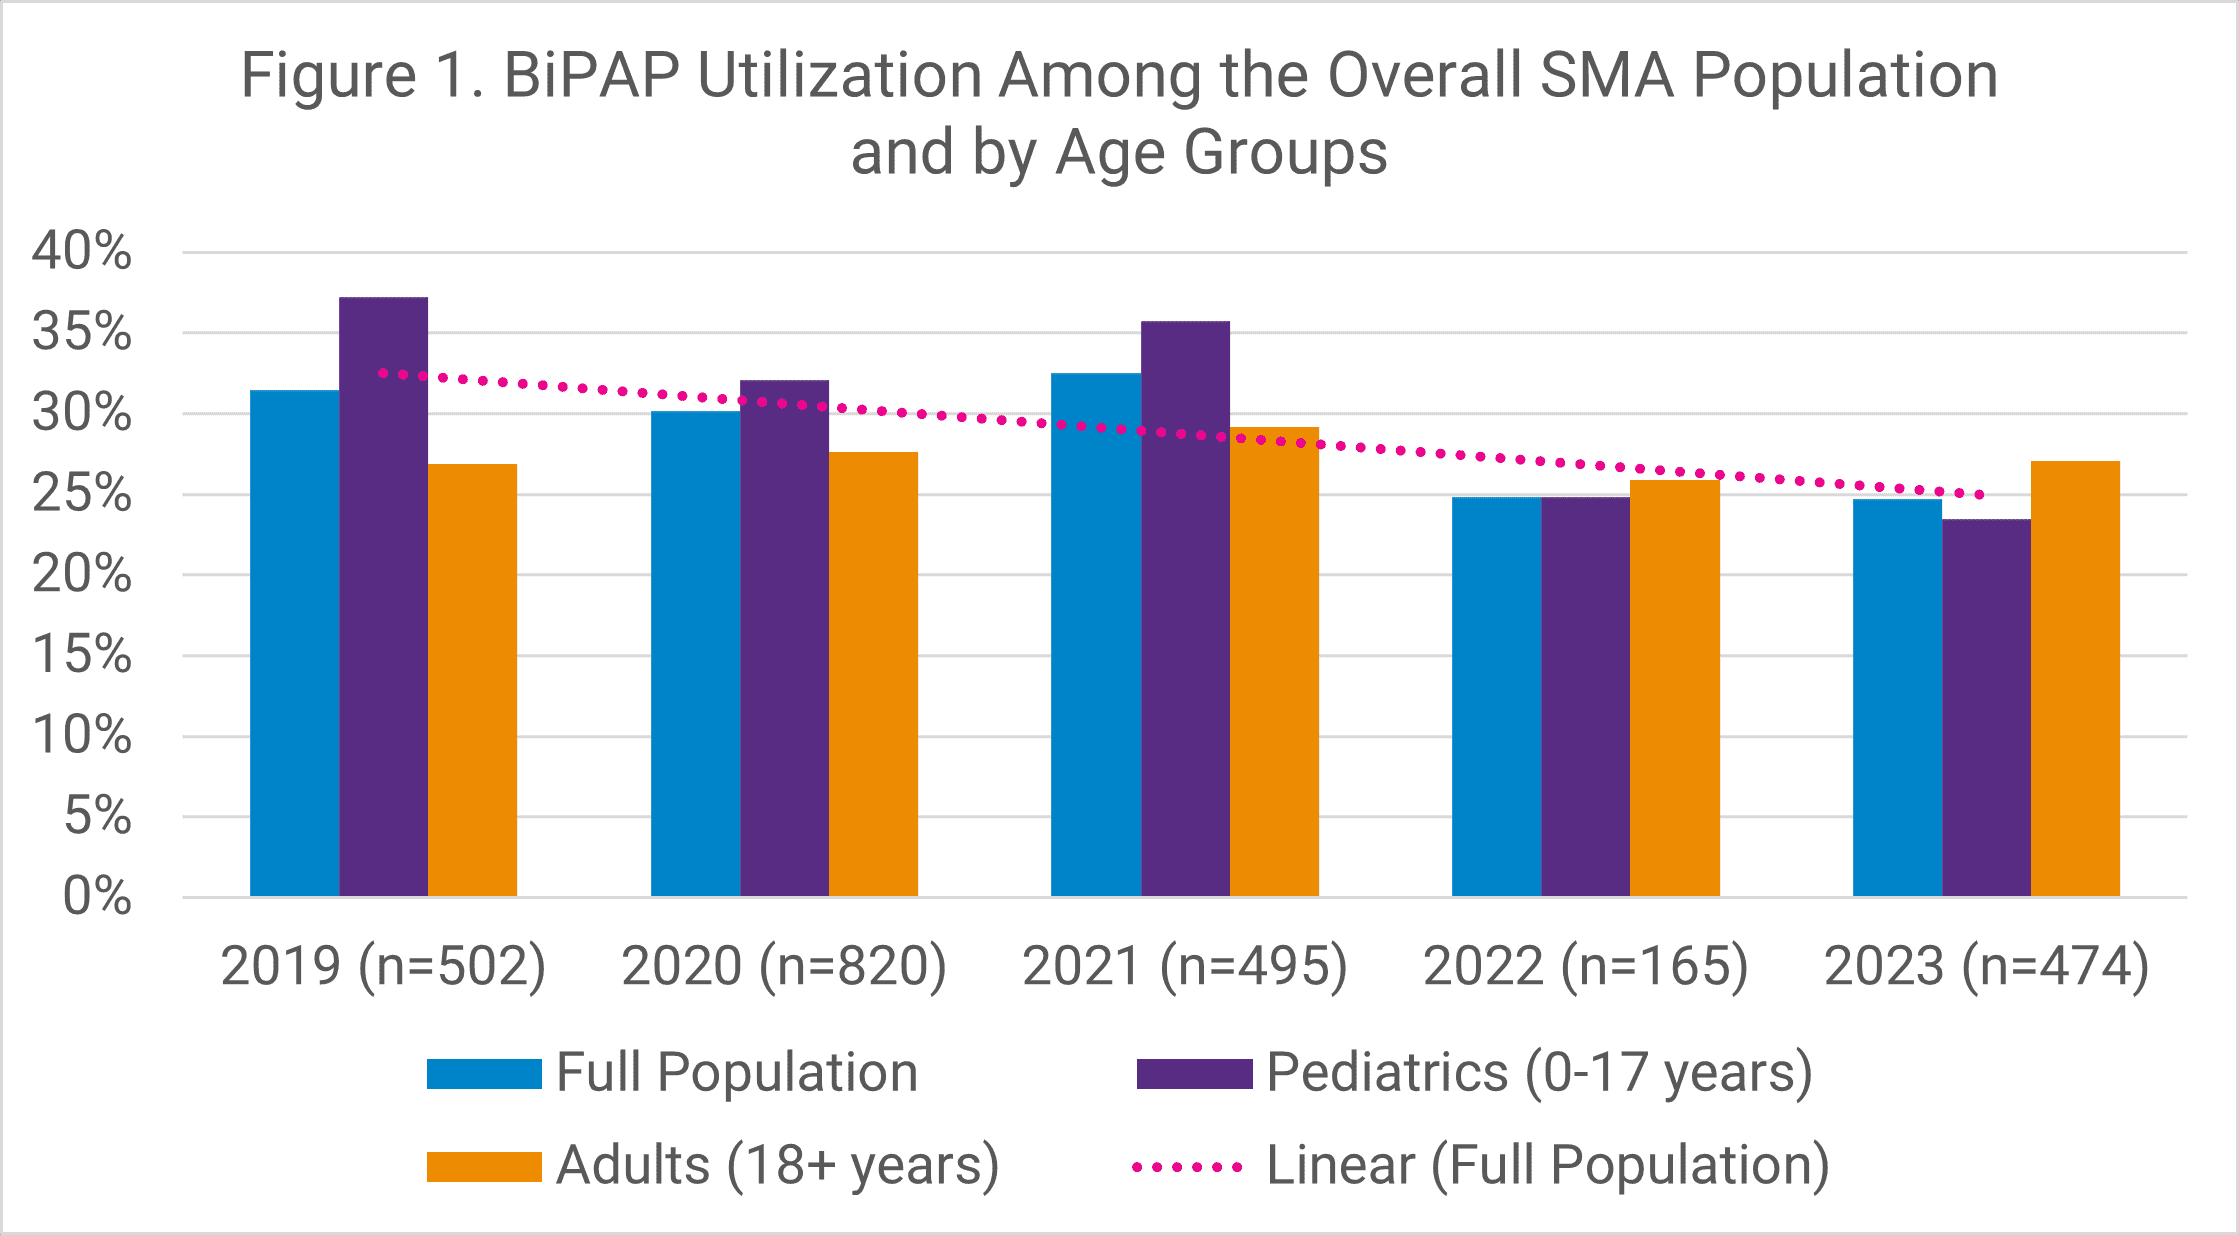 Figure 1 - BIPAP Utilization Among the Overall SMA Population and by Age Groups